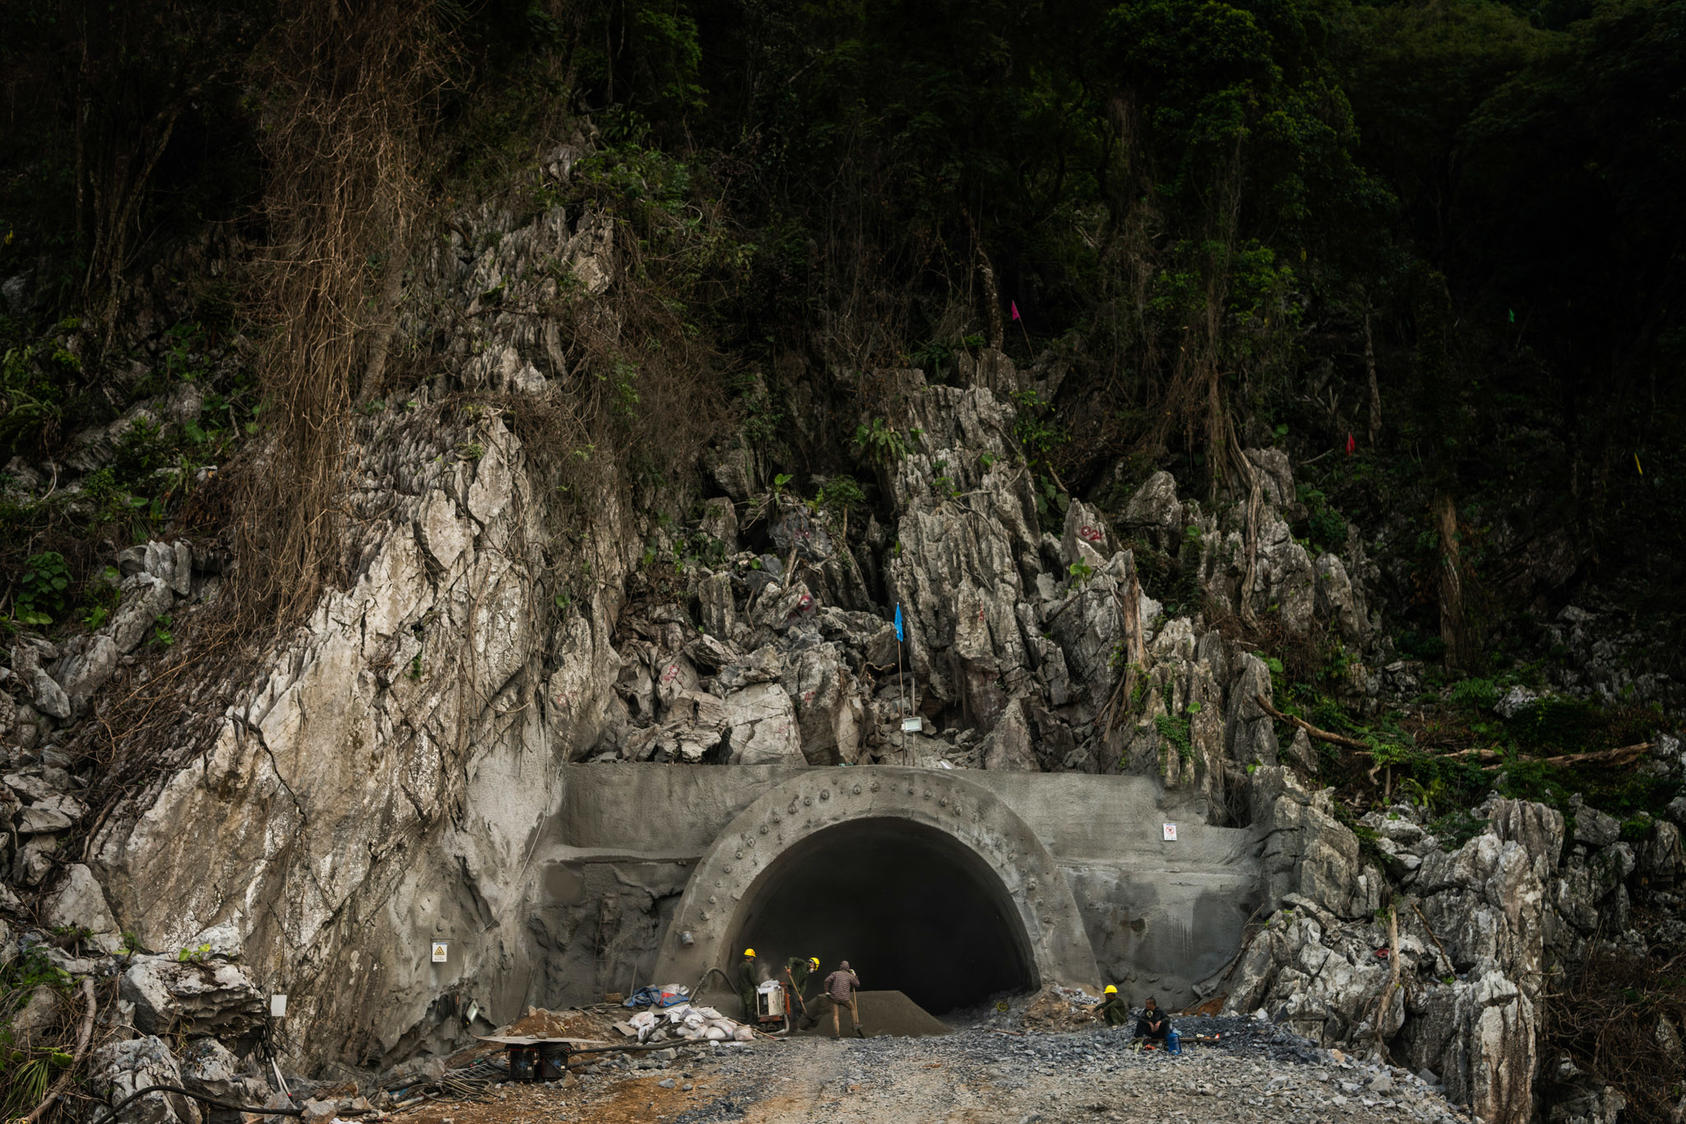 Chinese workers at a tunnel being built for a railway that will connect eight Asian countries, near Vang Vieng, Laos, May 7, 2017. The work is part of President Xi Jinping’s ambitious economic and geopolitical initiative promising more than $1 trillion in infrastructure projects spanning dozens of countries across Asia, Africa and Europe. (Adam Dean/The New York Times) 